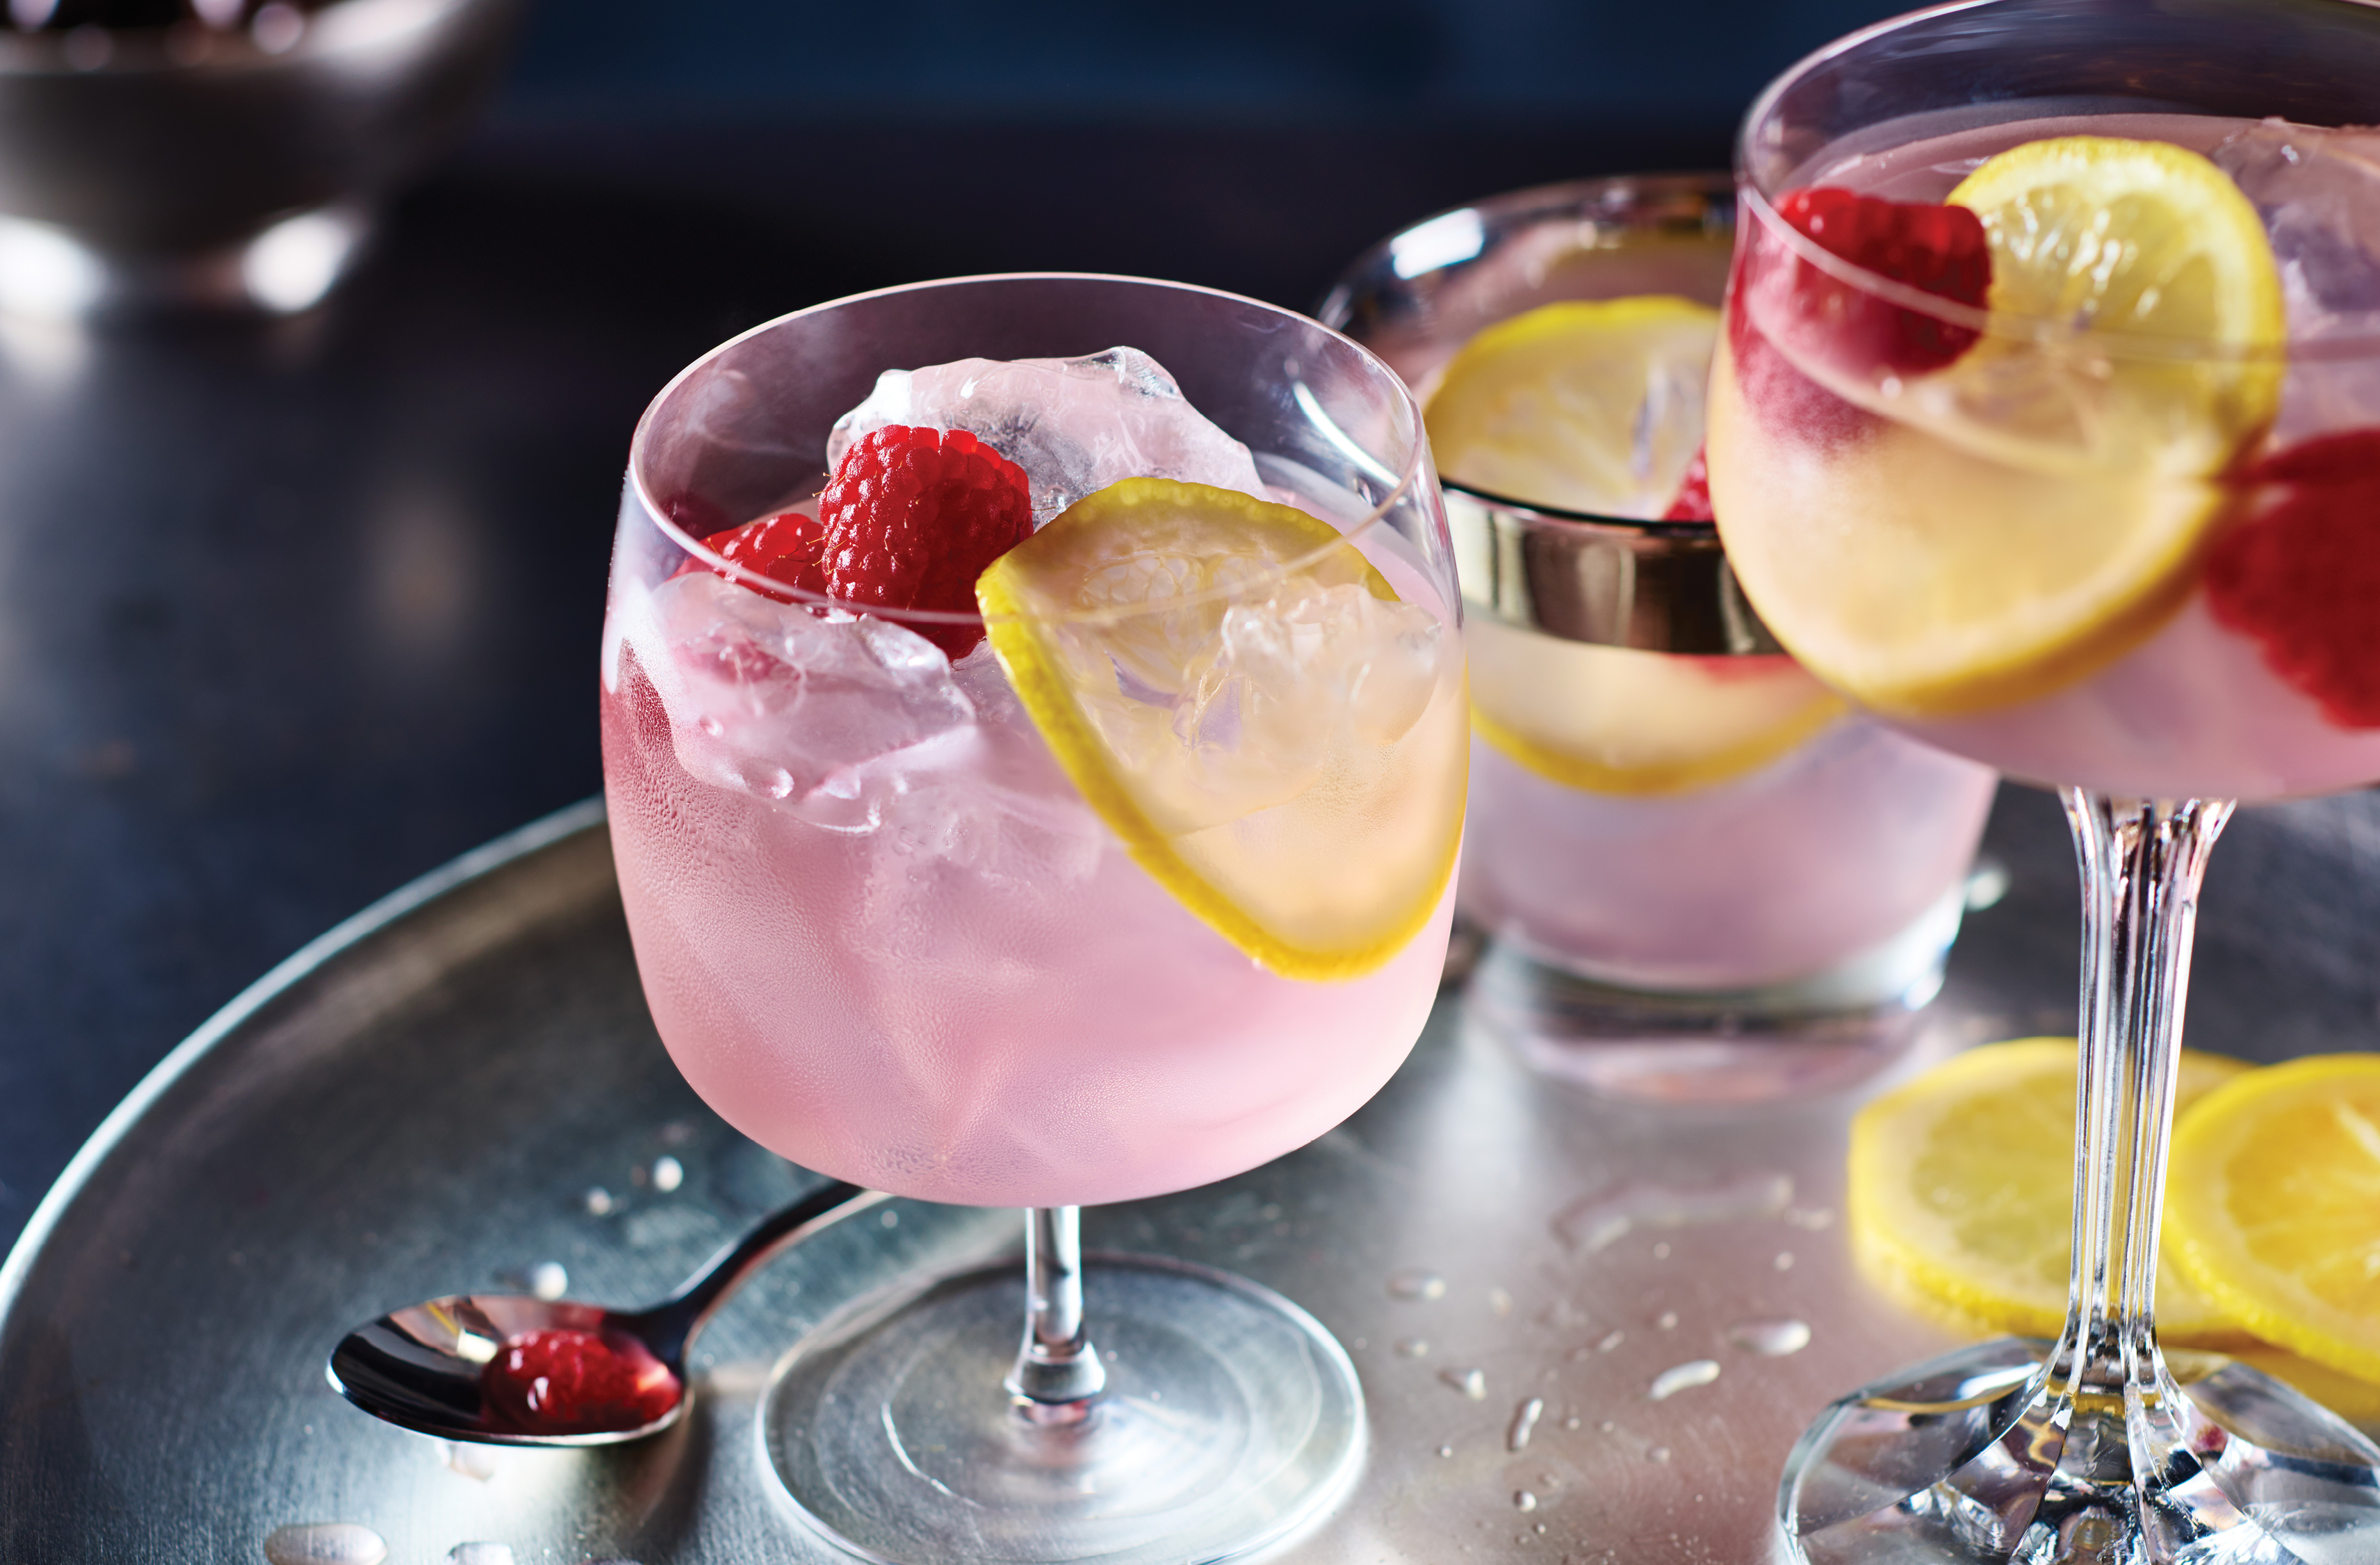 3 glasses of pink ginger kicker cocktail with raspberries and lemon slices as garnish
